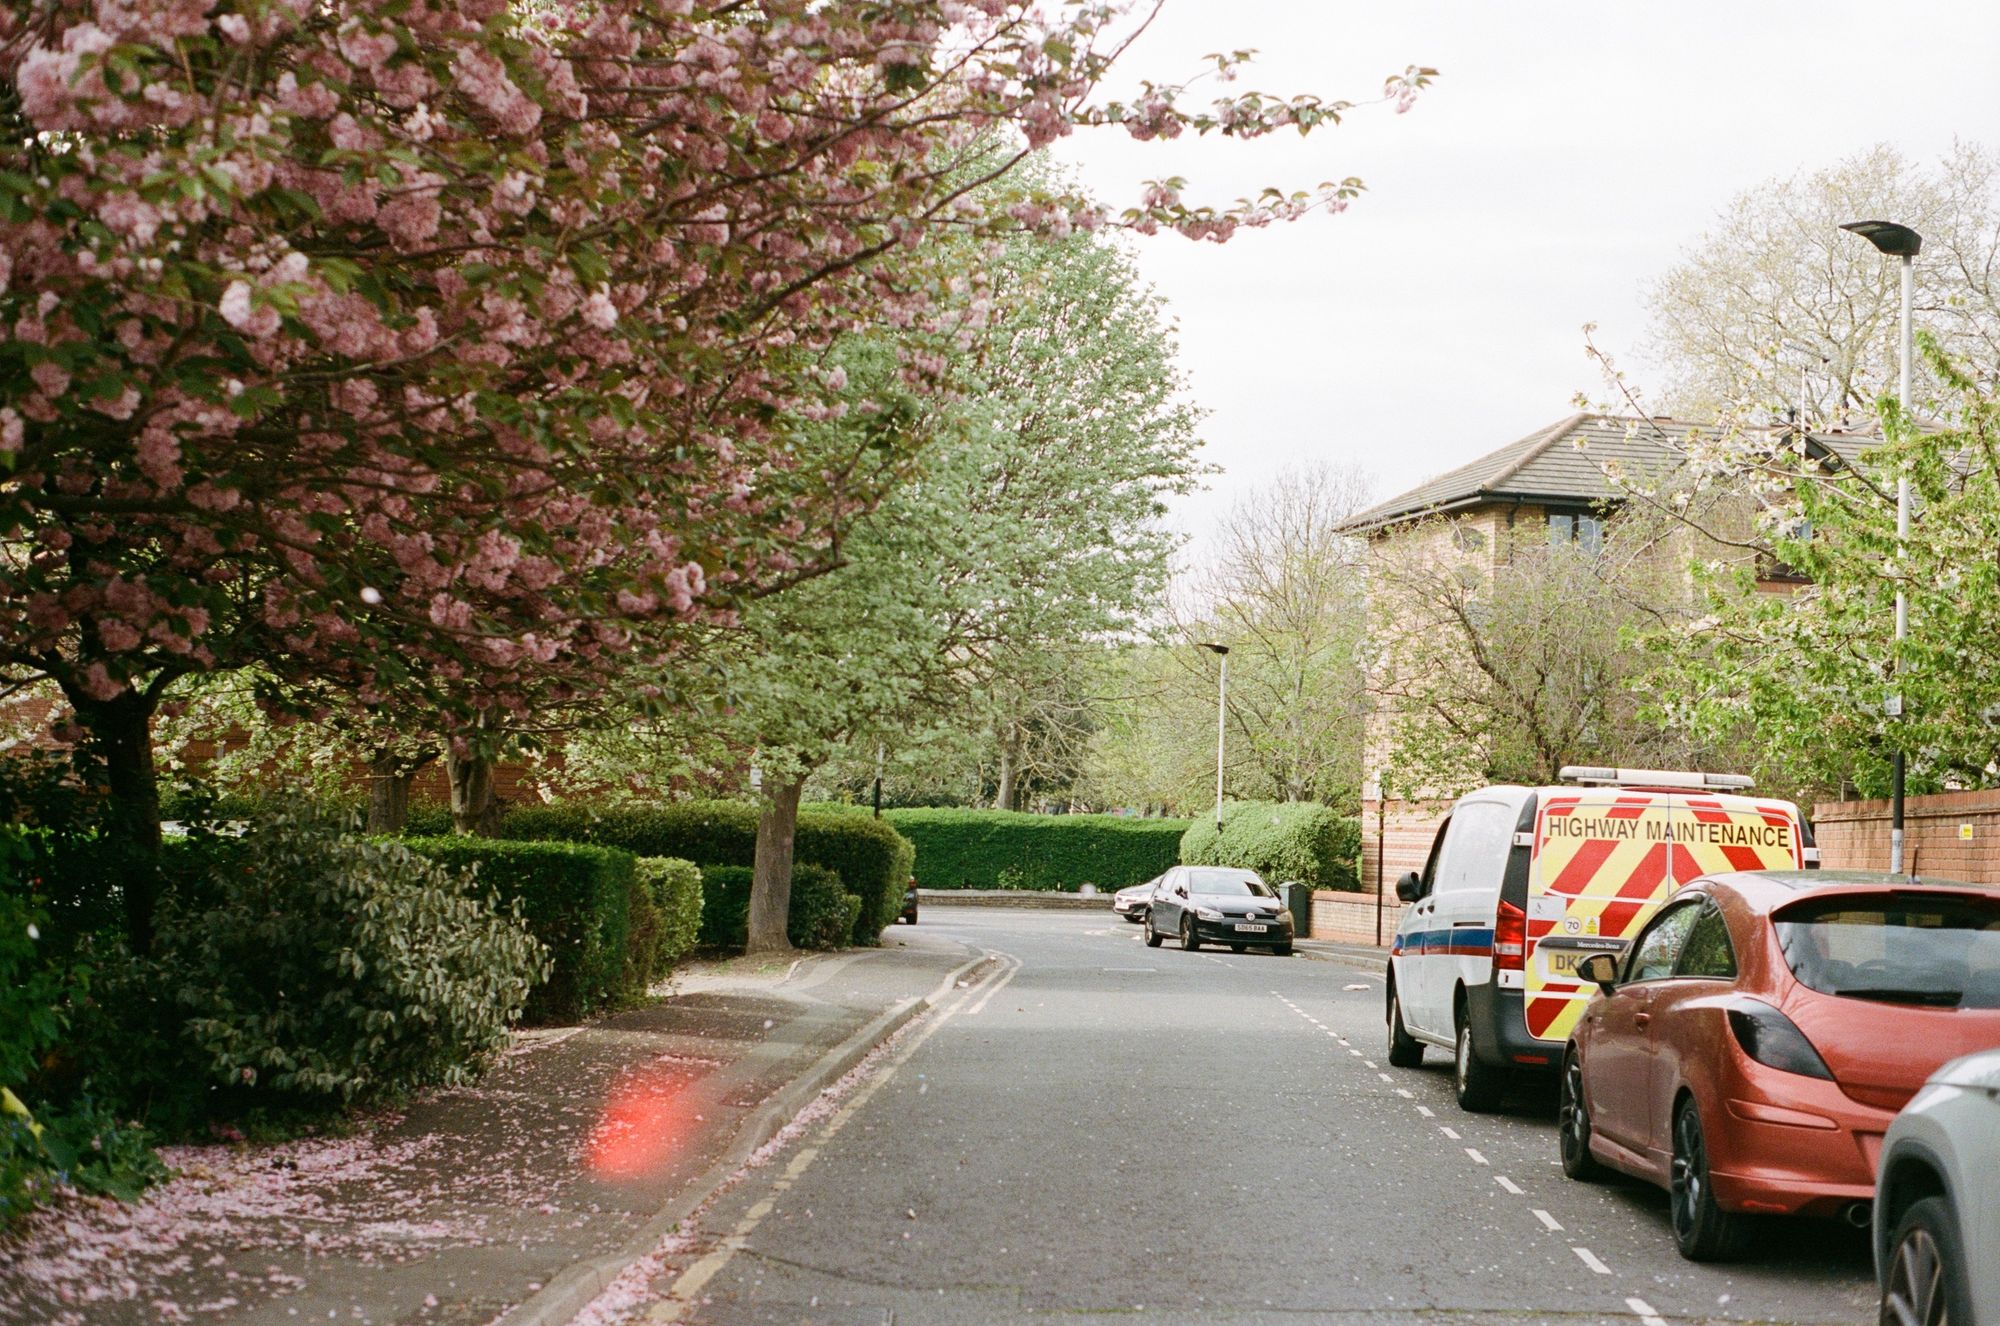 View down a residential street with a blossom tree that's starting to go over, with leaves replacing where browning flowers once were. The pavement is covered in pink petals.